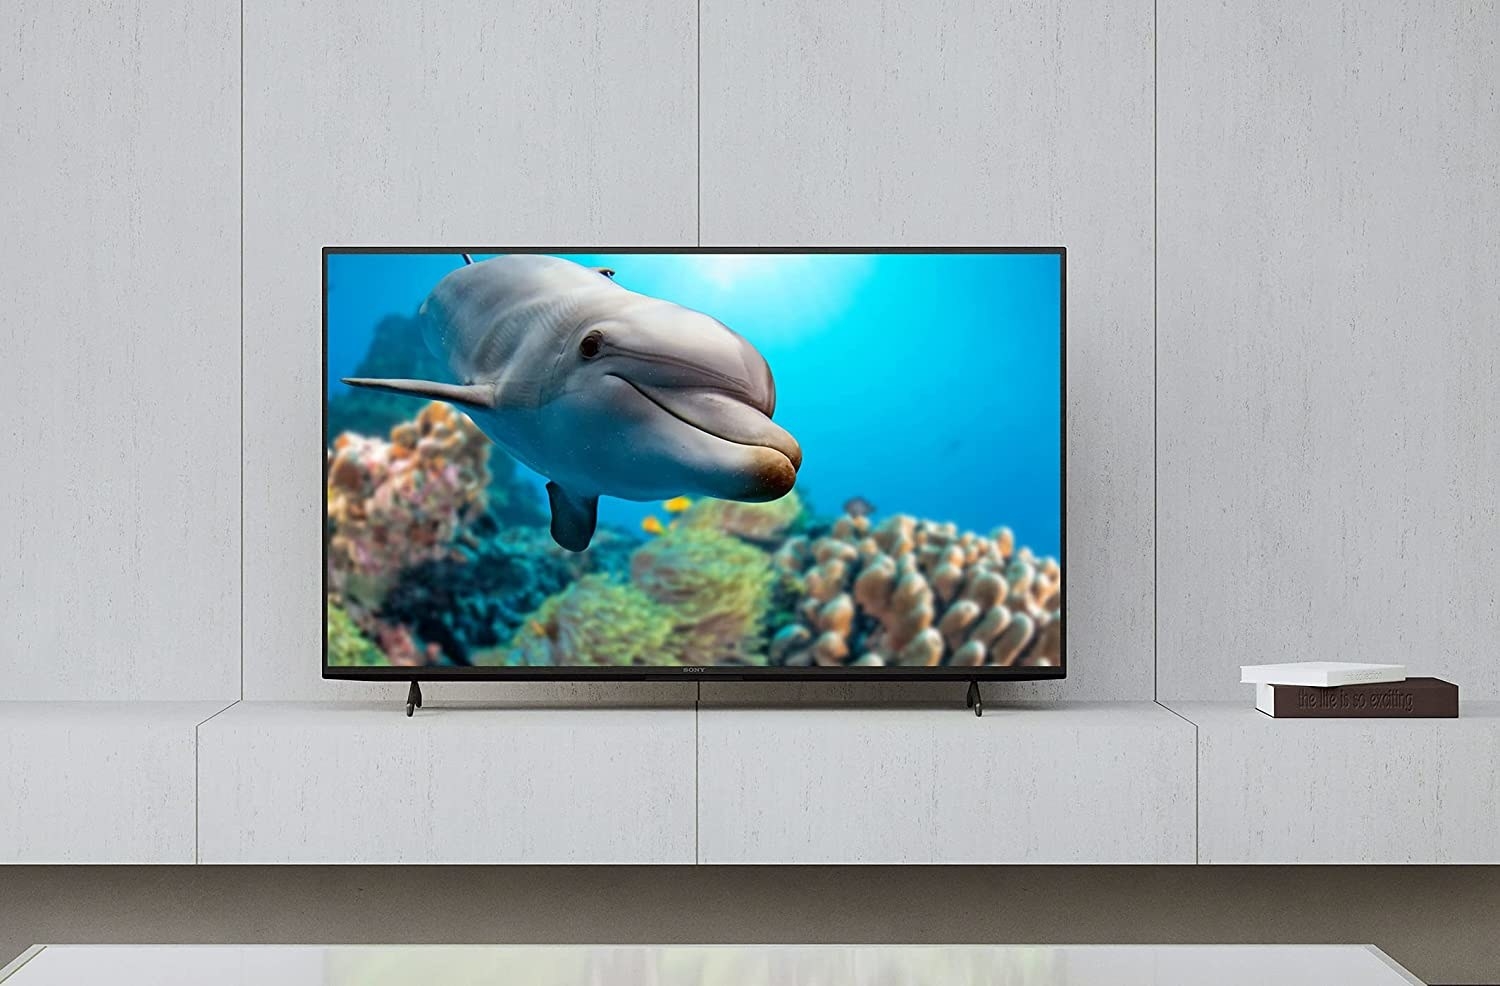 A TV with a dolphin on it